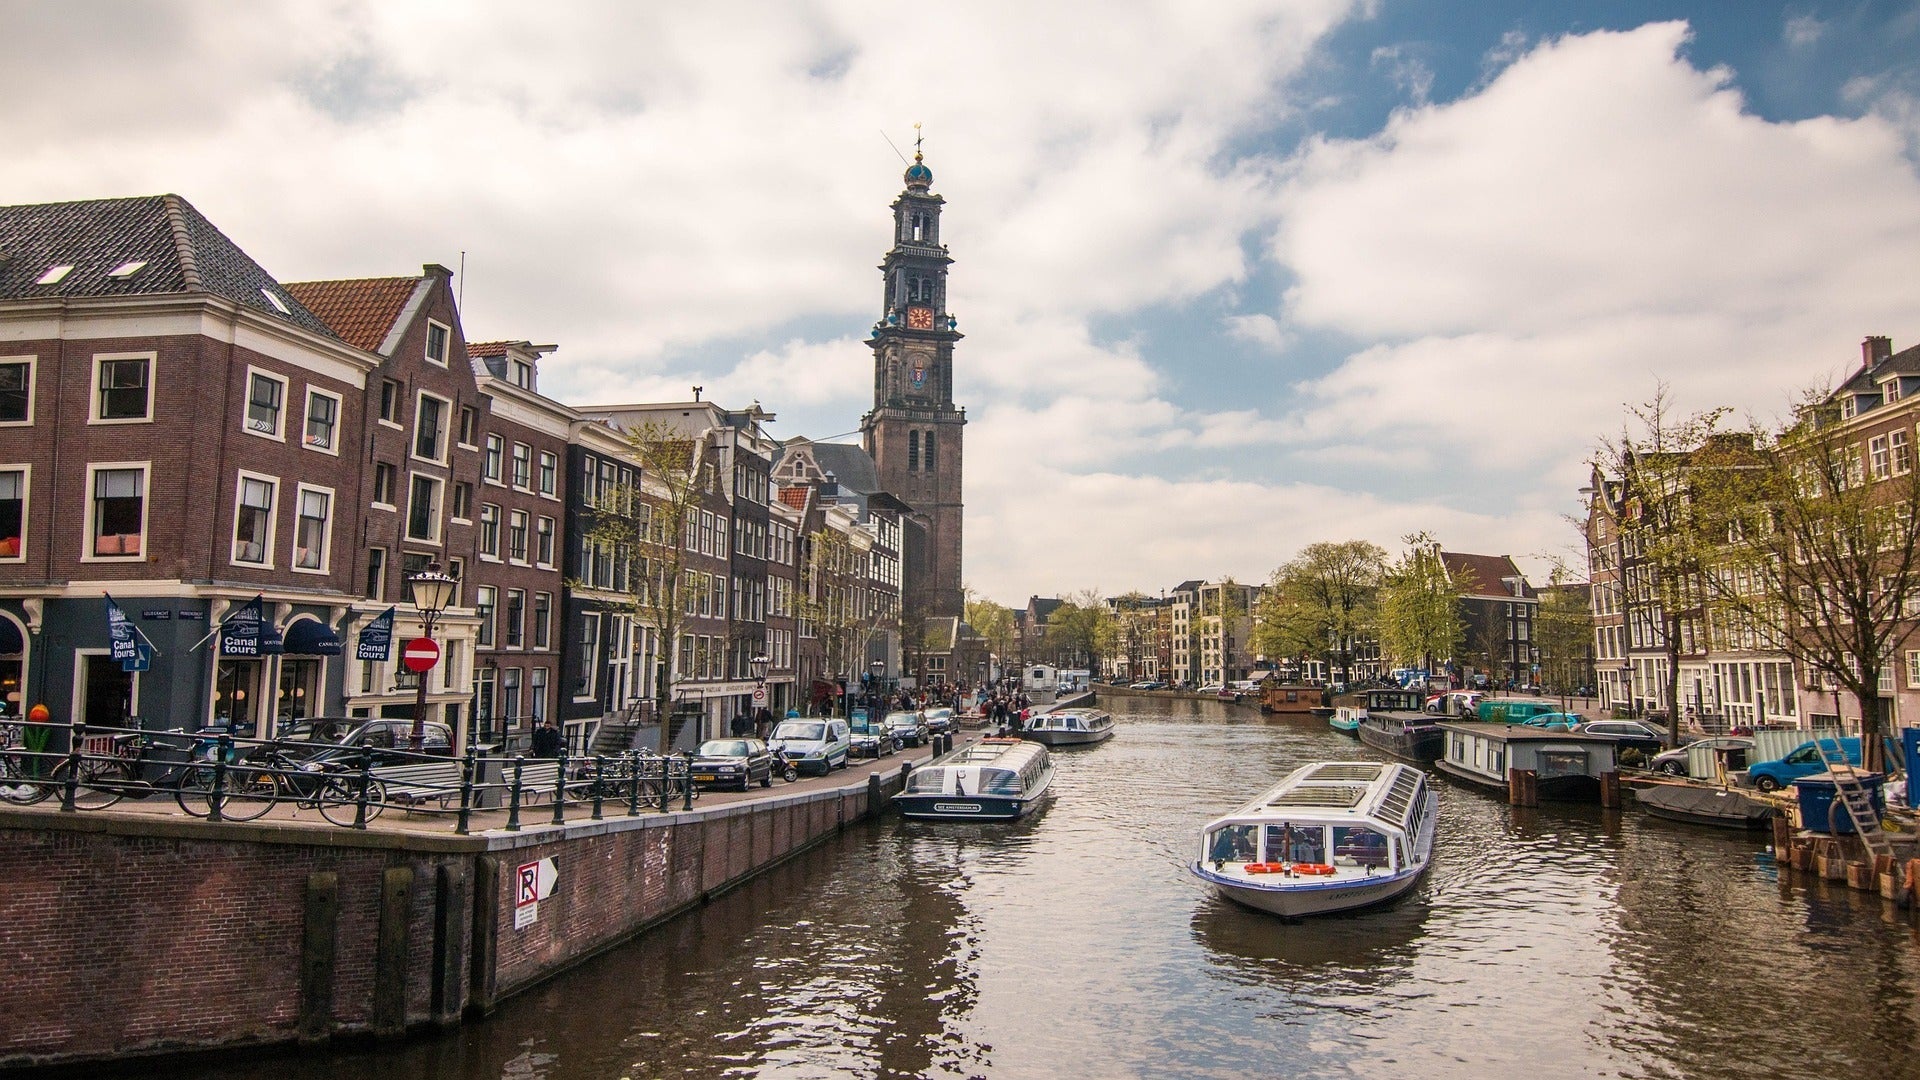 buildings in amsterdam with a riversdtreet and boats in the middle as travel target for esim